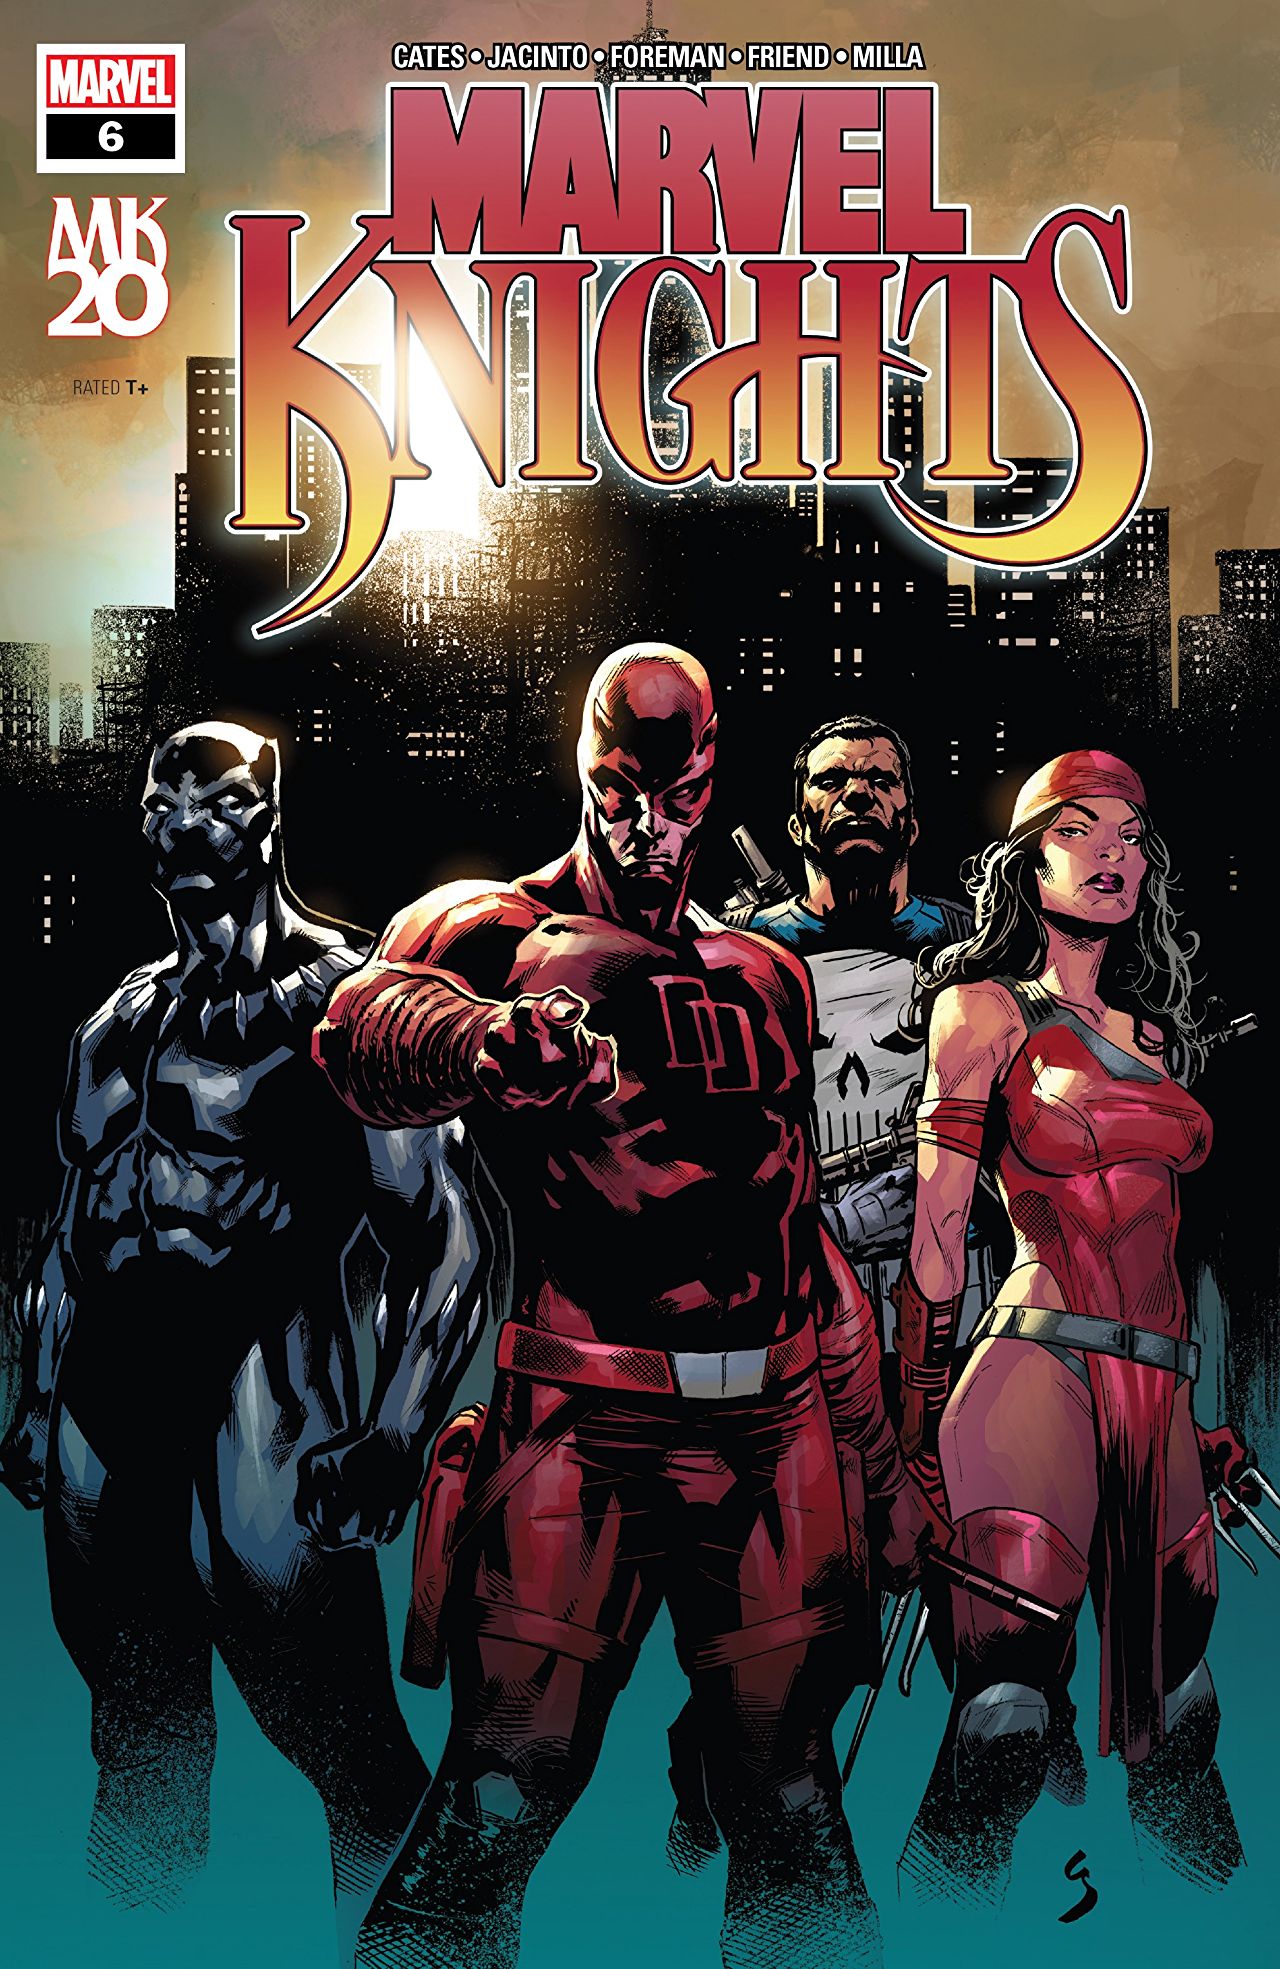 Marvel Preview: Marvel Knights: 20th Anniversary #6